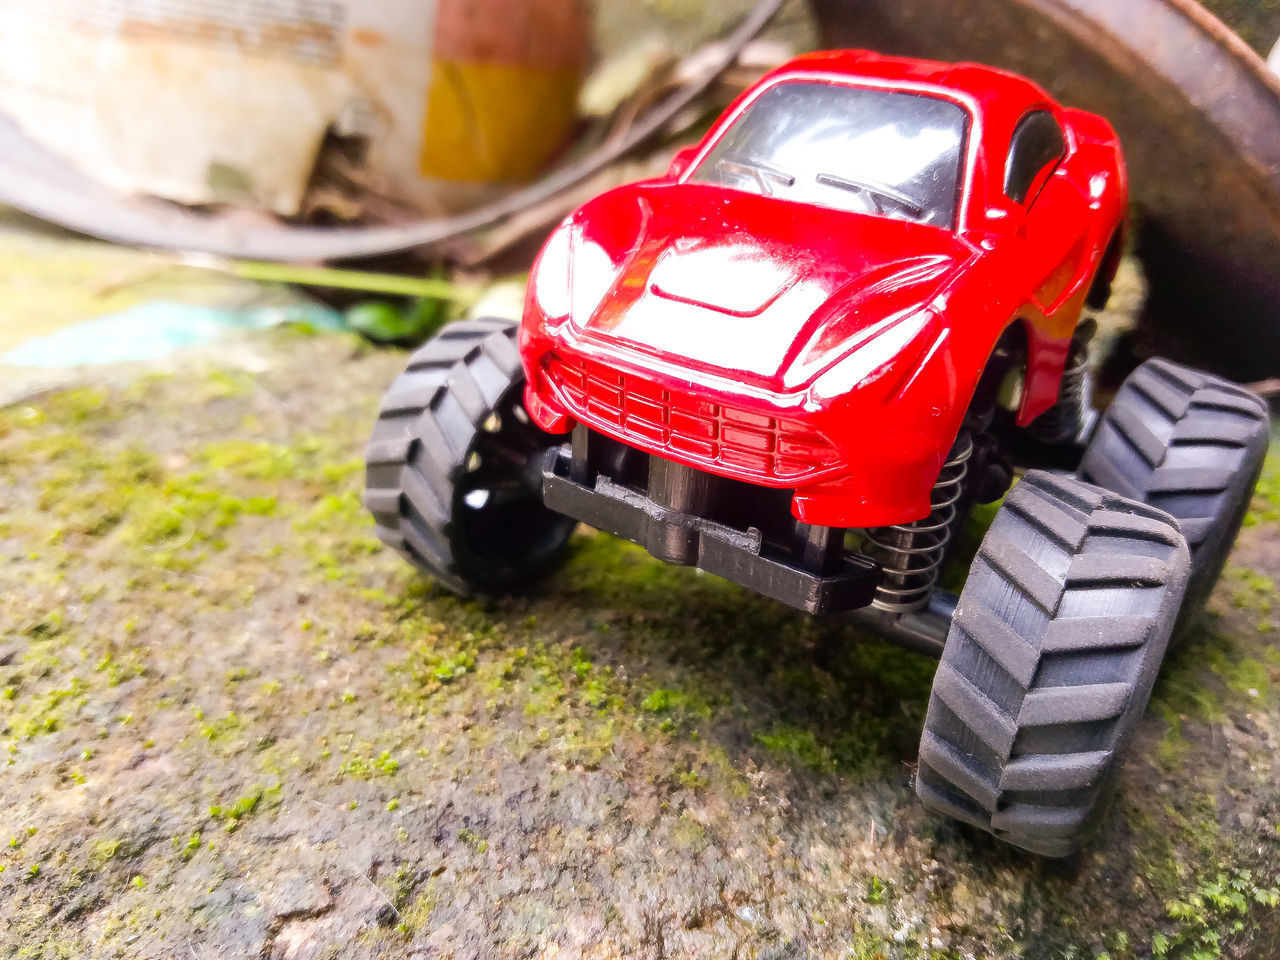 CLOSE-UP OF TOY CAR ON ROCKS